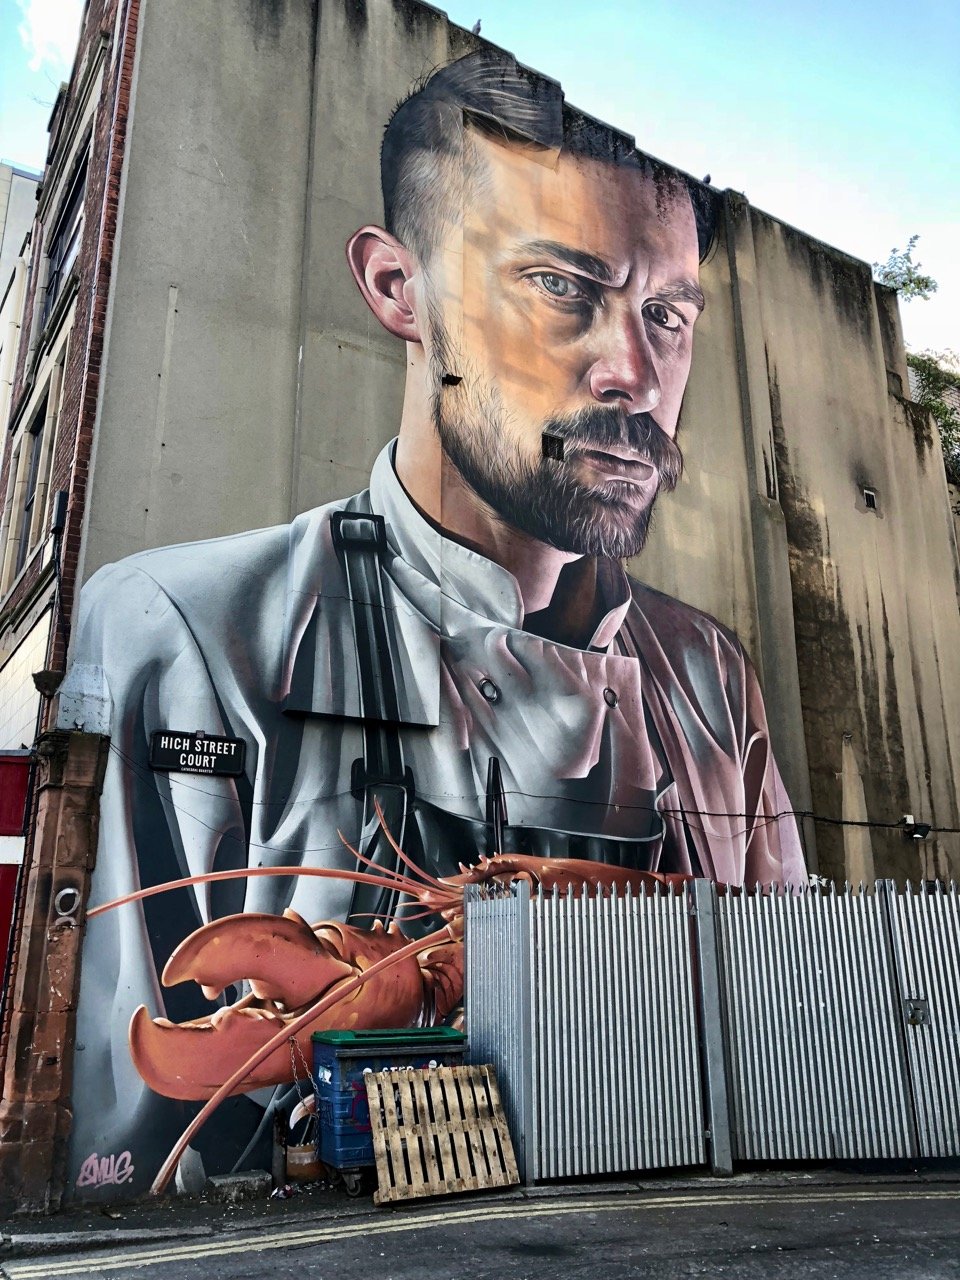 Chef with lobster street art,